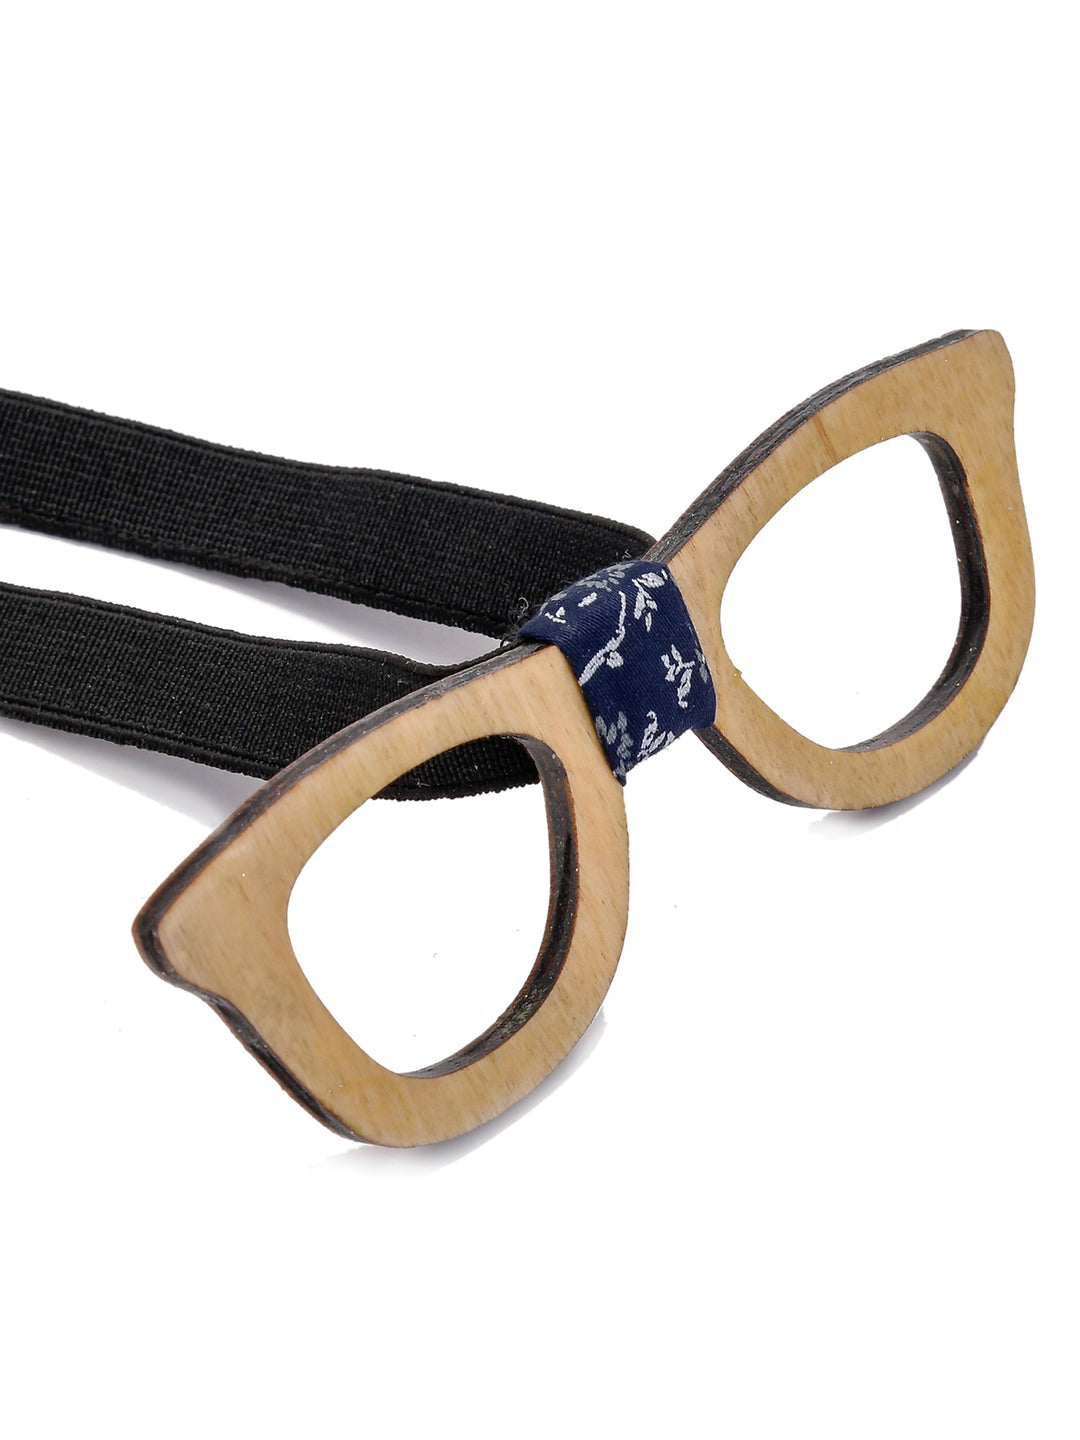 Spectacle Wooden Bow Tie